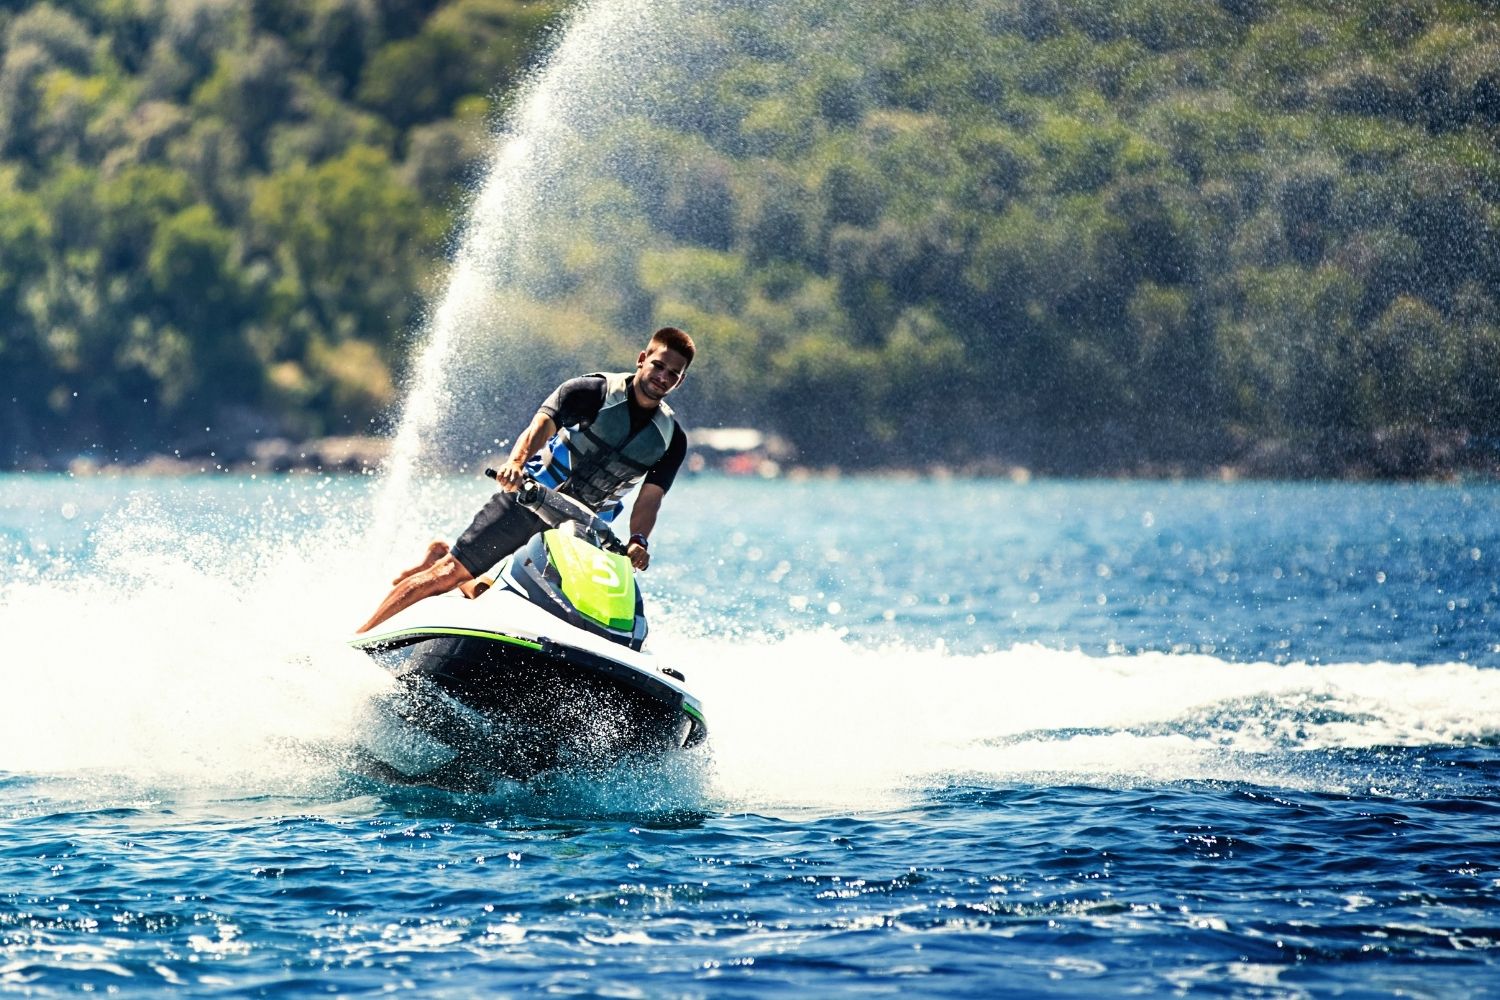 Scuba Diving & Water Sports At Grand Island